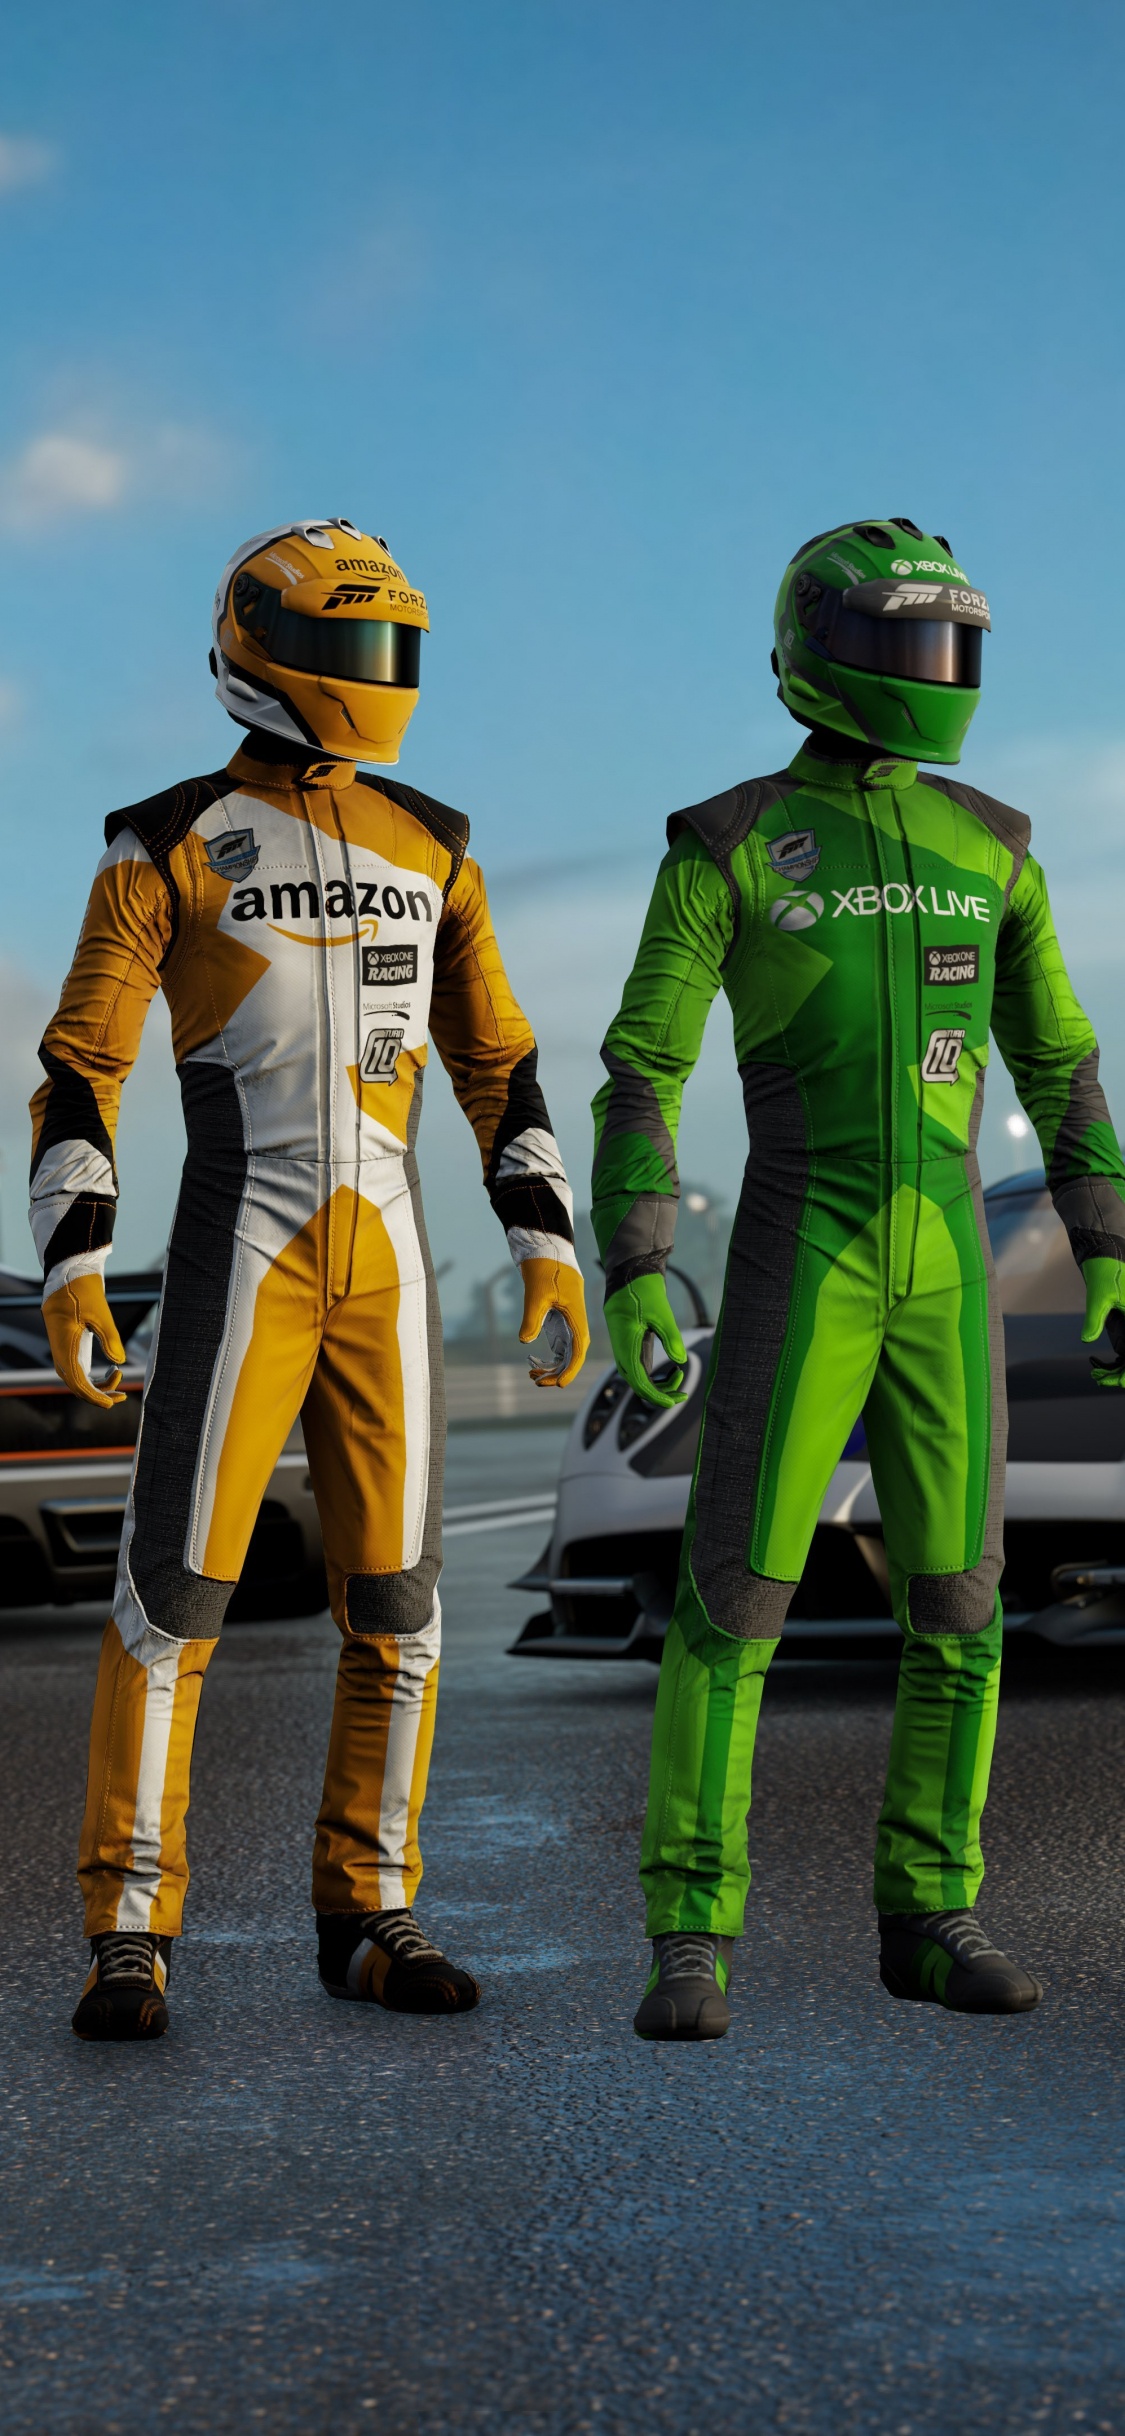 2 Men in Green and Yellow Helmet and Helmet Standing Beside White Sports Car During Daytime. Wallpaper in 1125x2436 Resolution